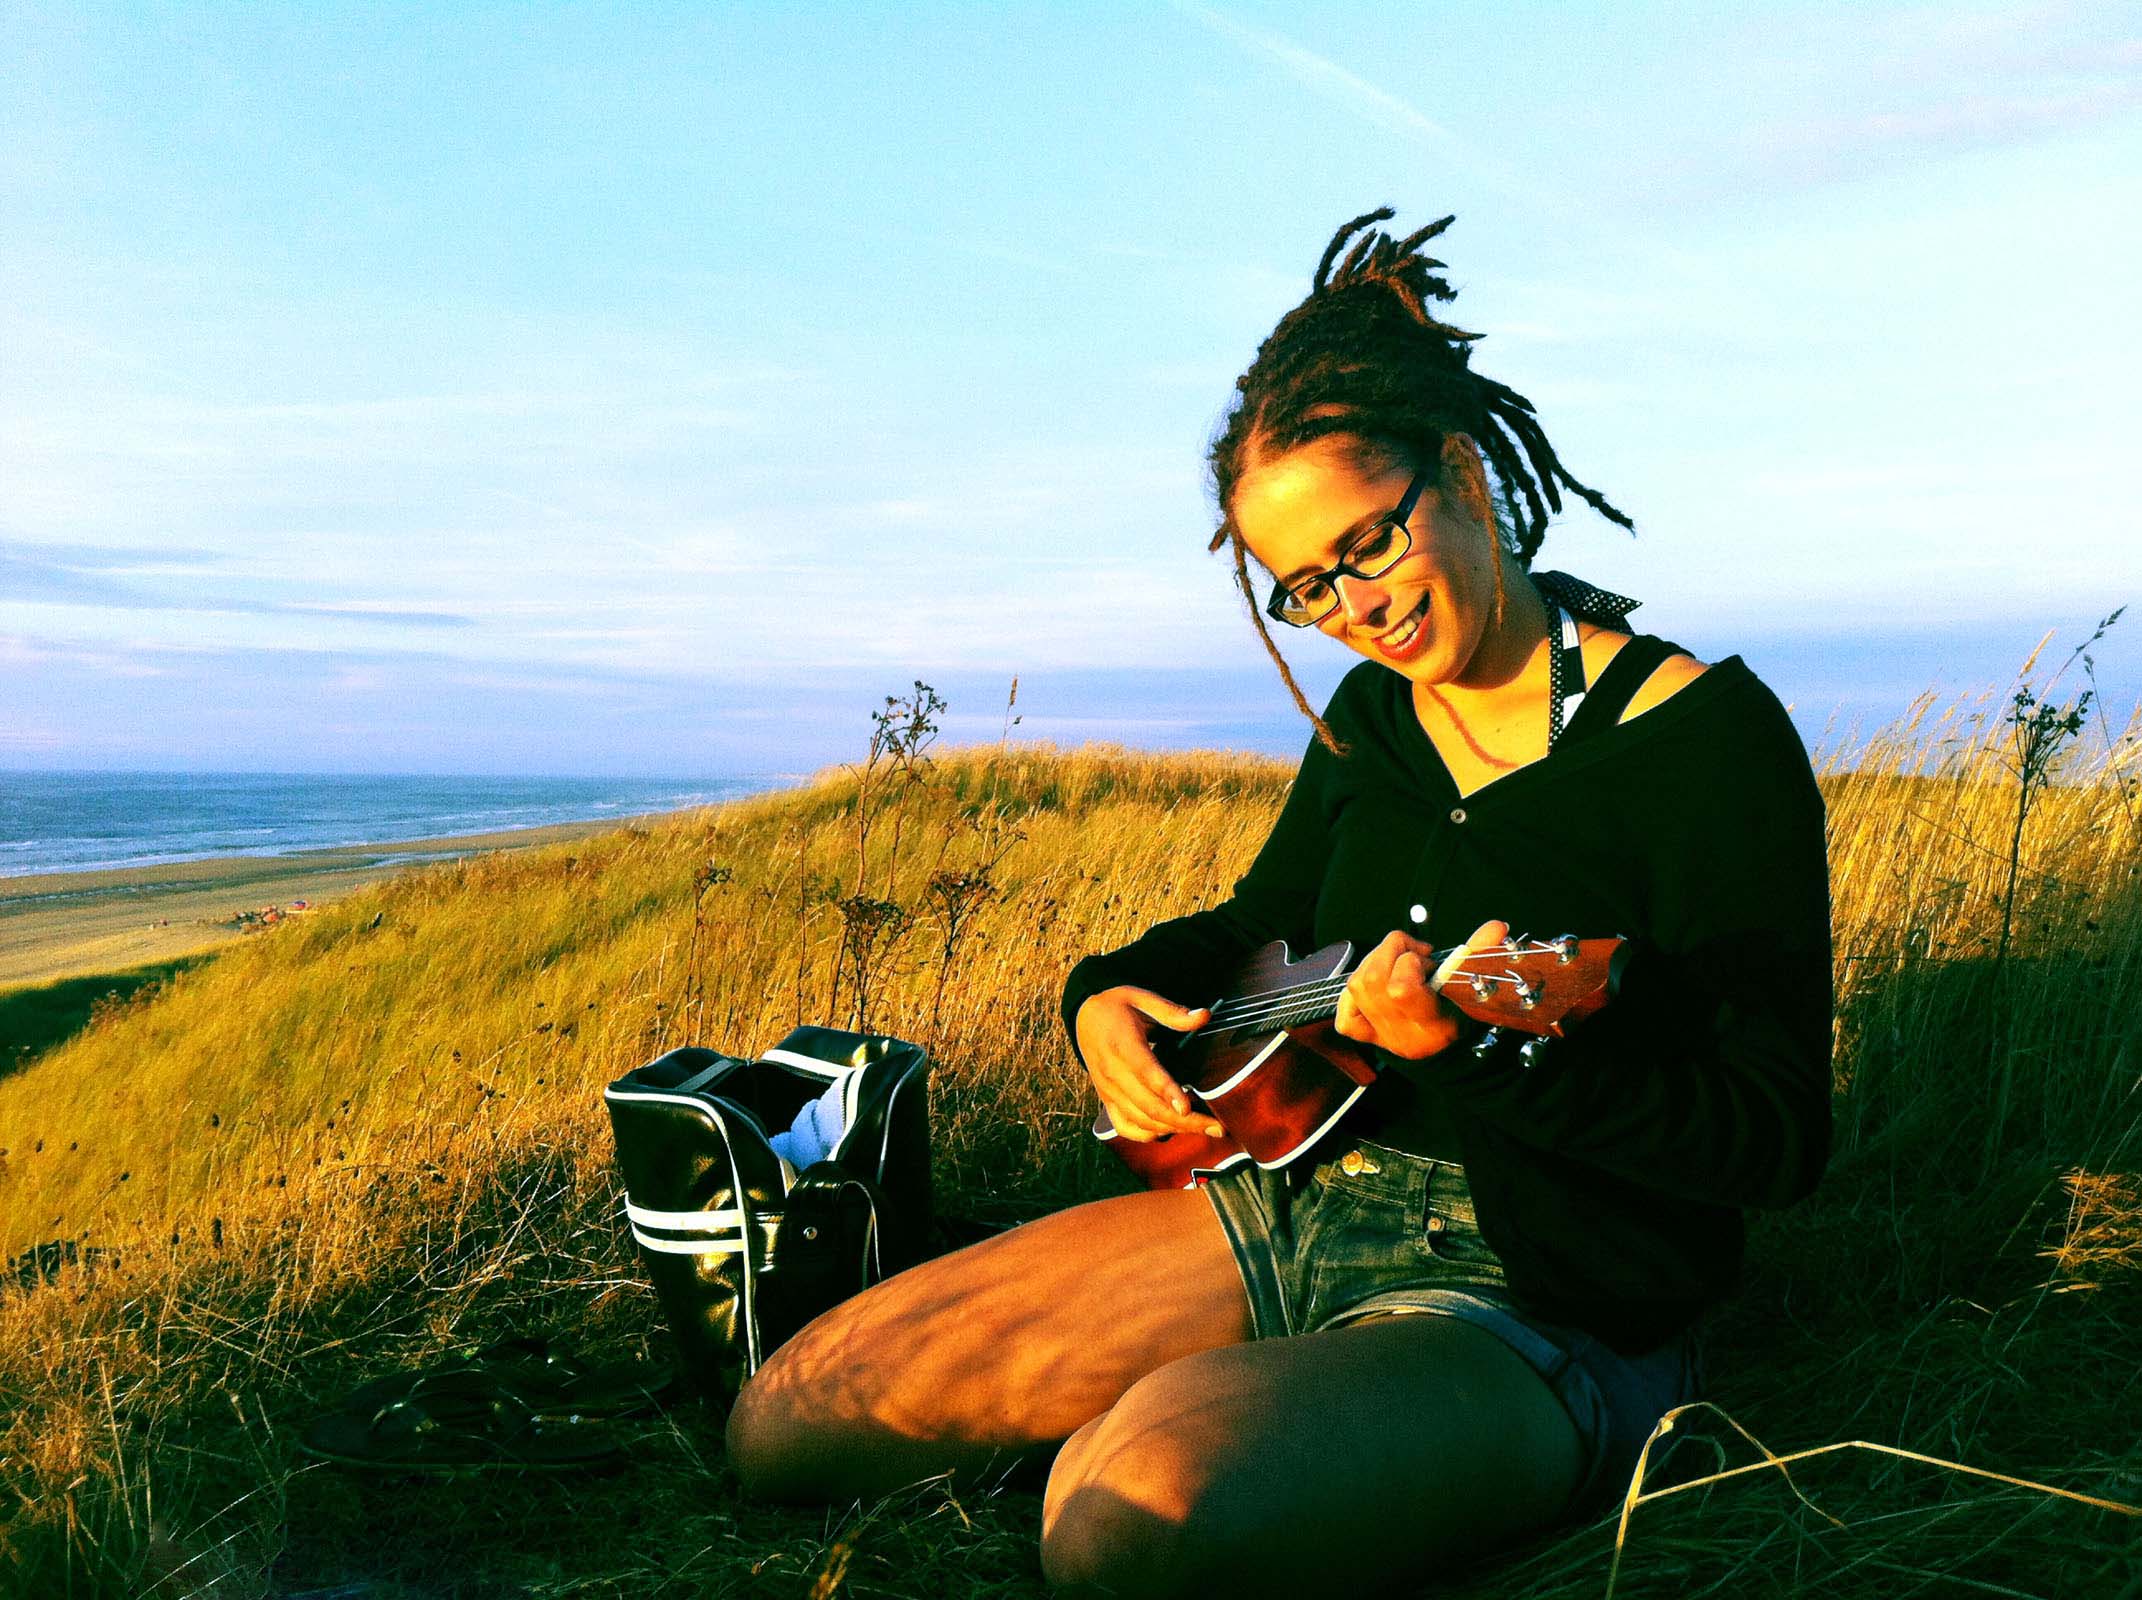 Claudia Hansen playing ukulele in the dunes at the beach